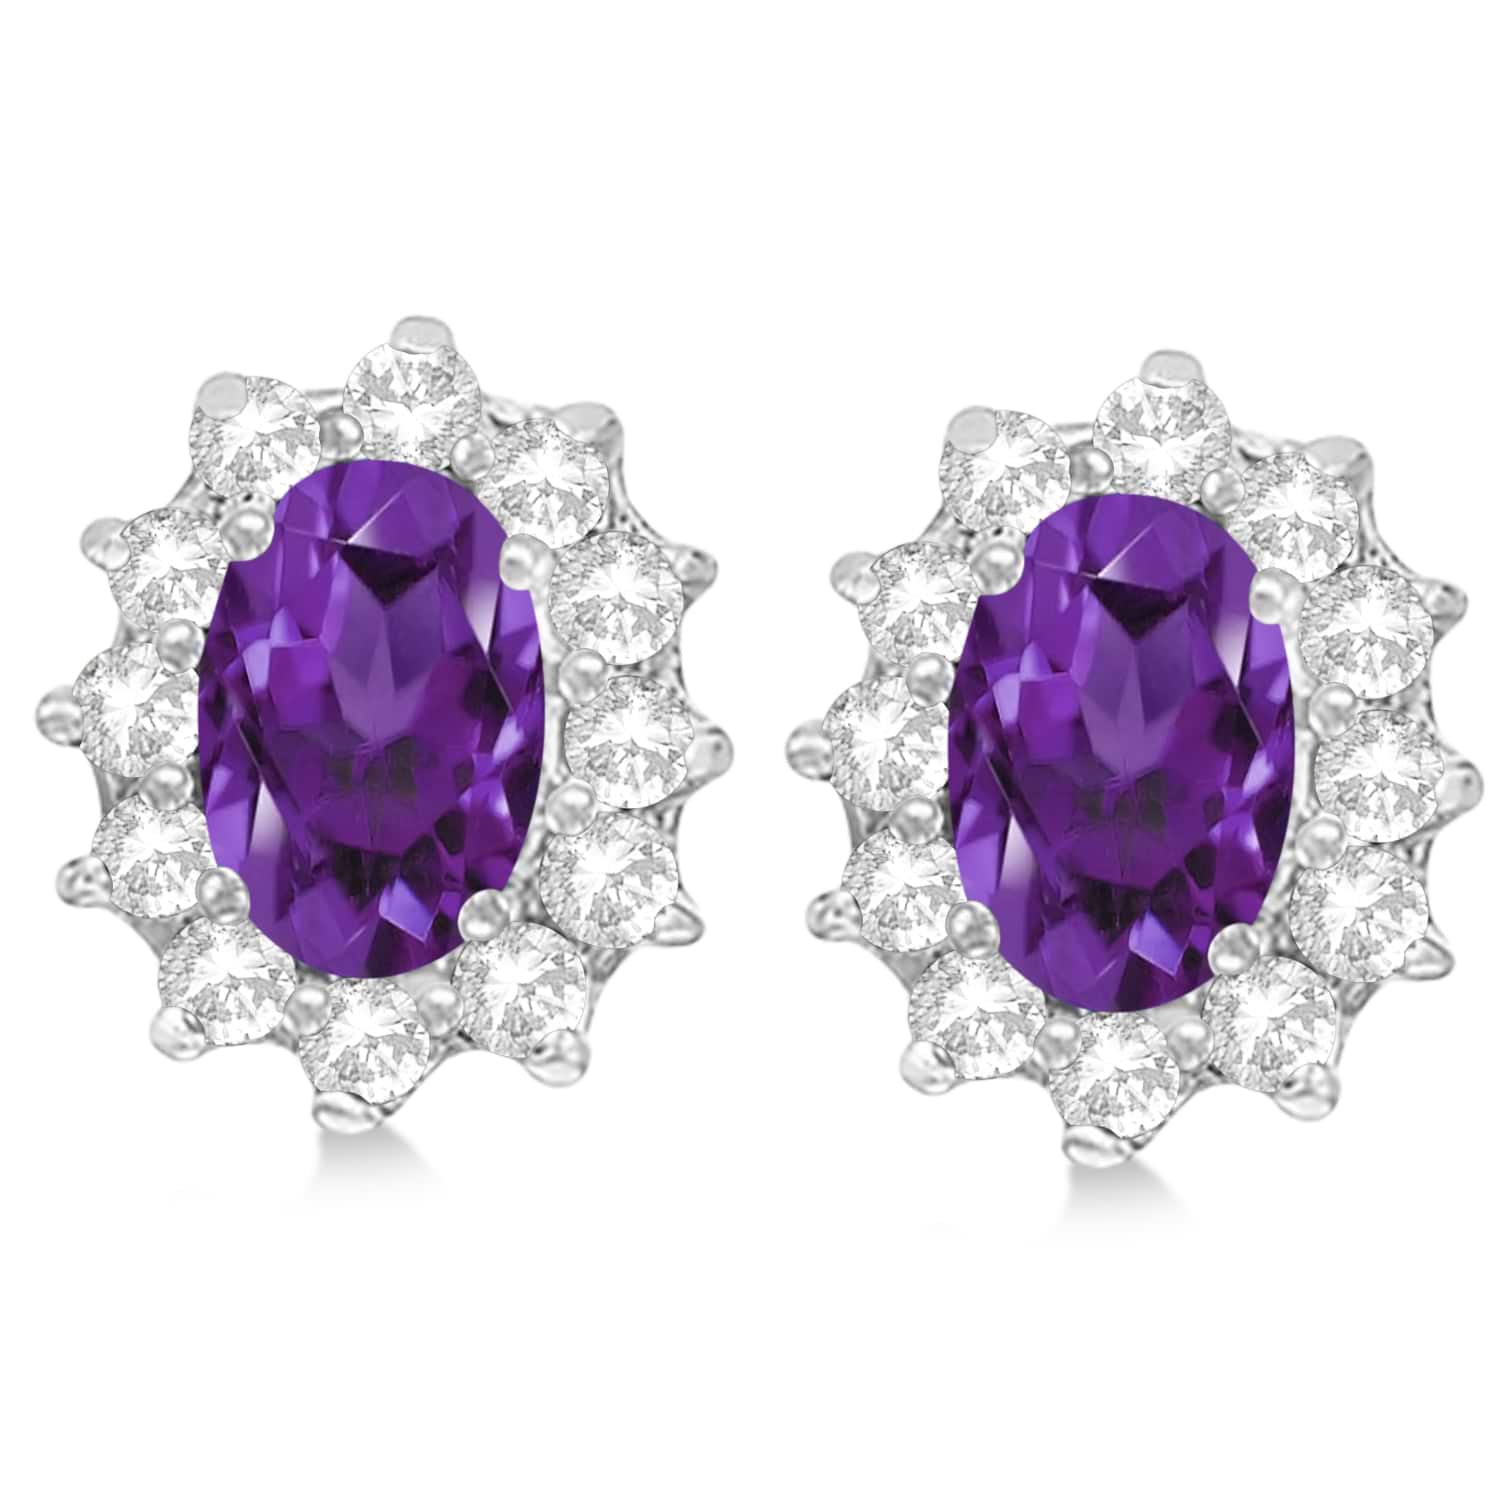 Oval Amethyst & Diamond Accented Earrings 14k White Gold (2.05ct)